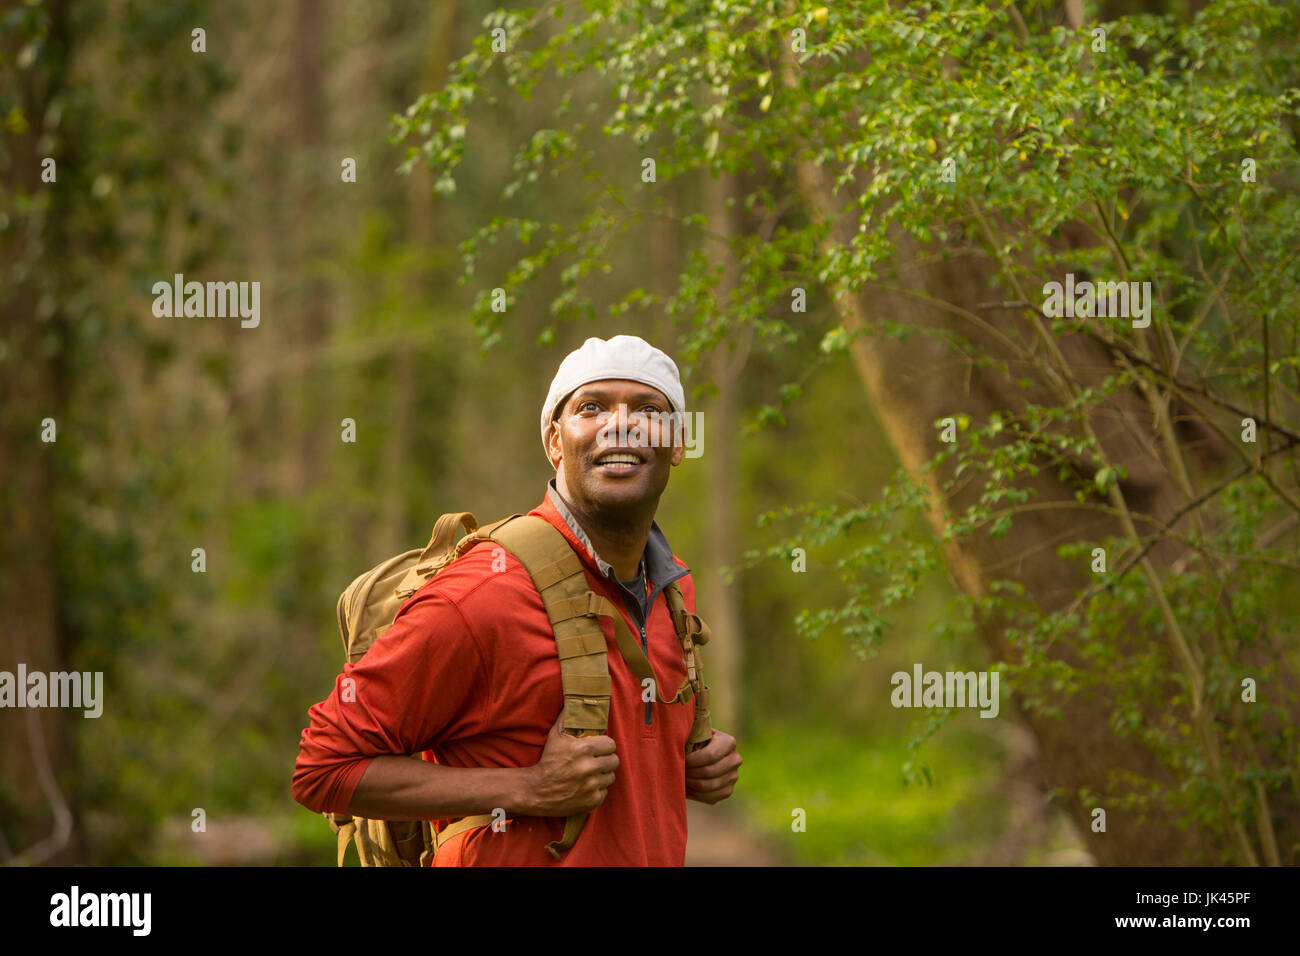 African American man standing in forest carrying backpack Stock Photo